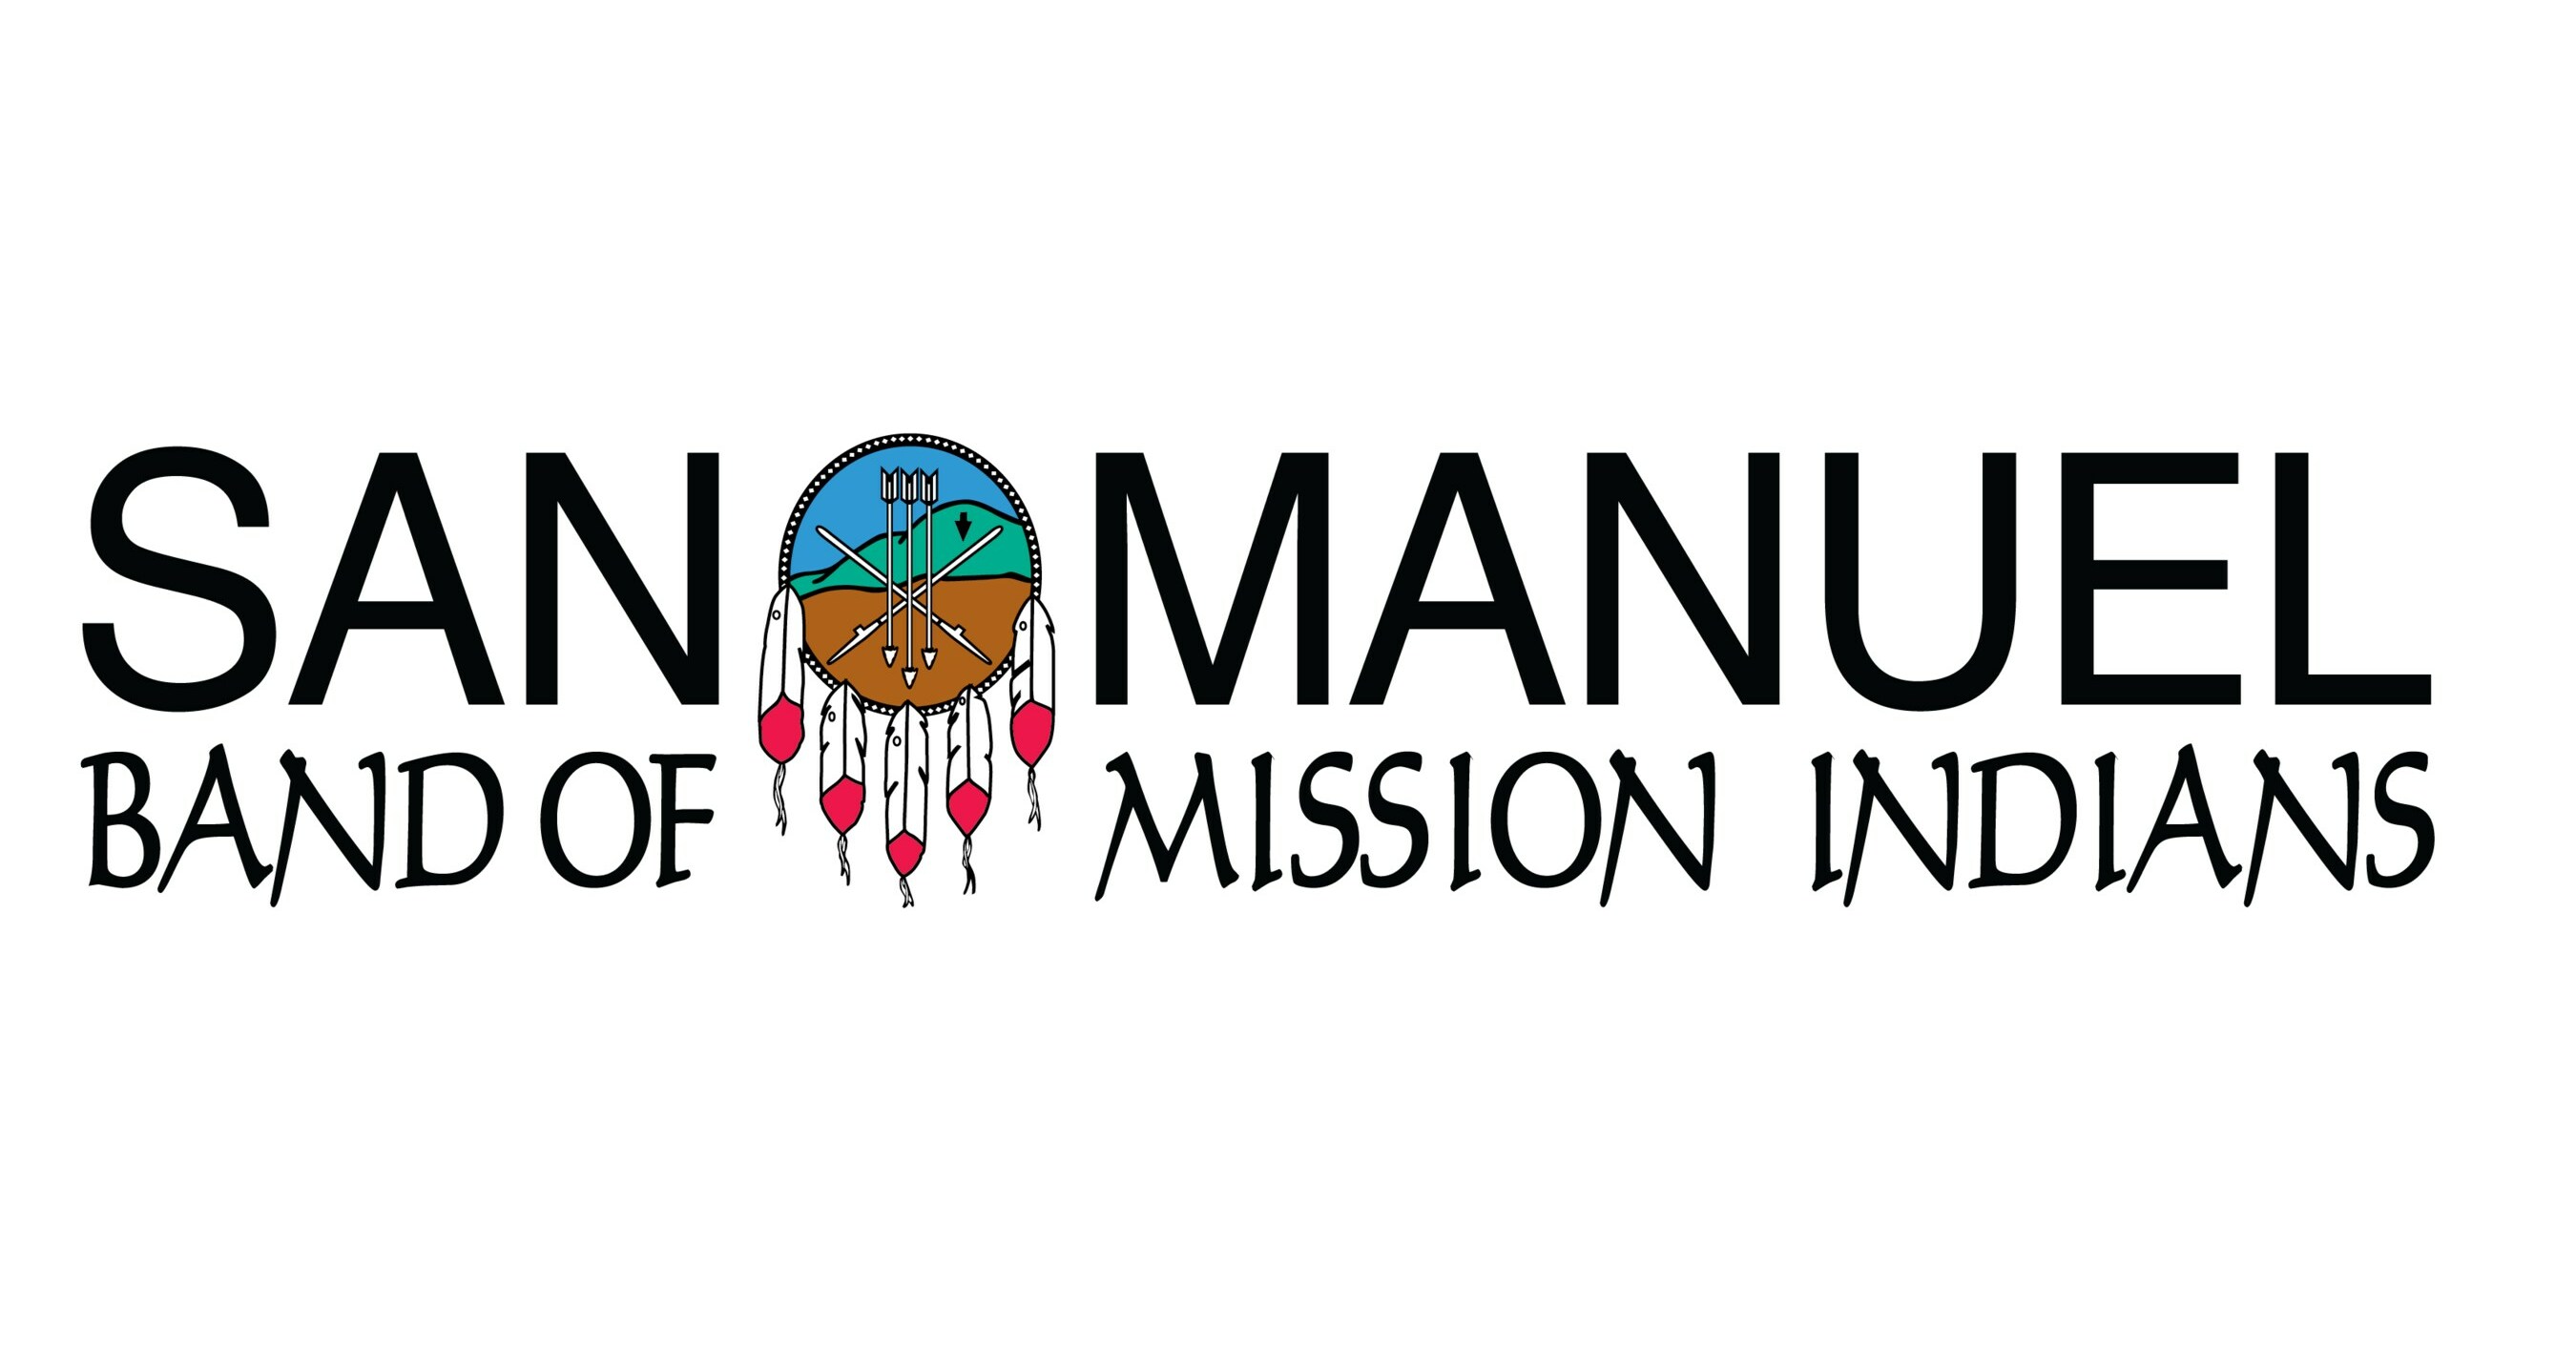 San Manuel Band of Mission Indians recognized as Responsible